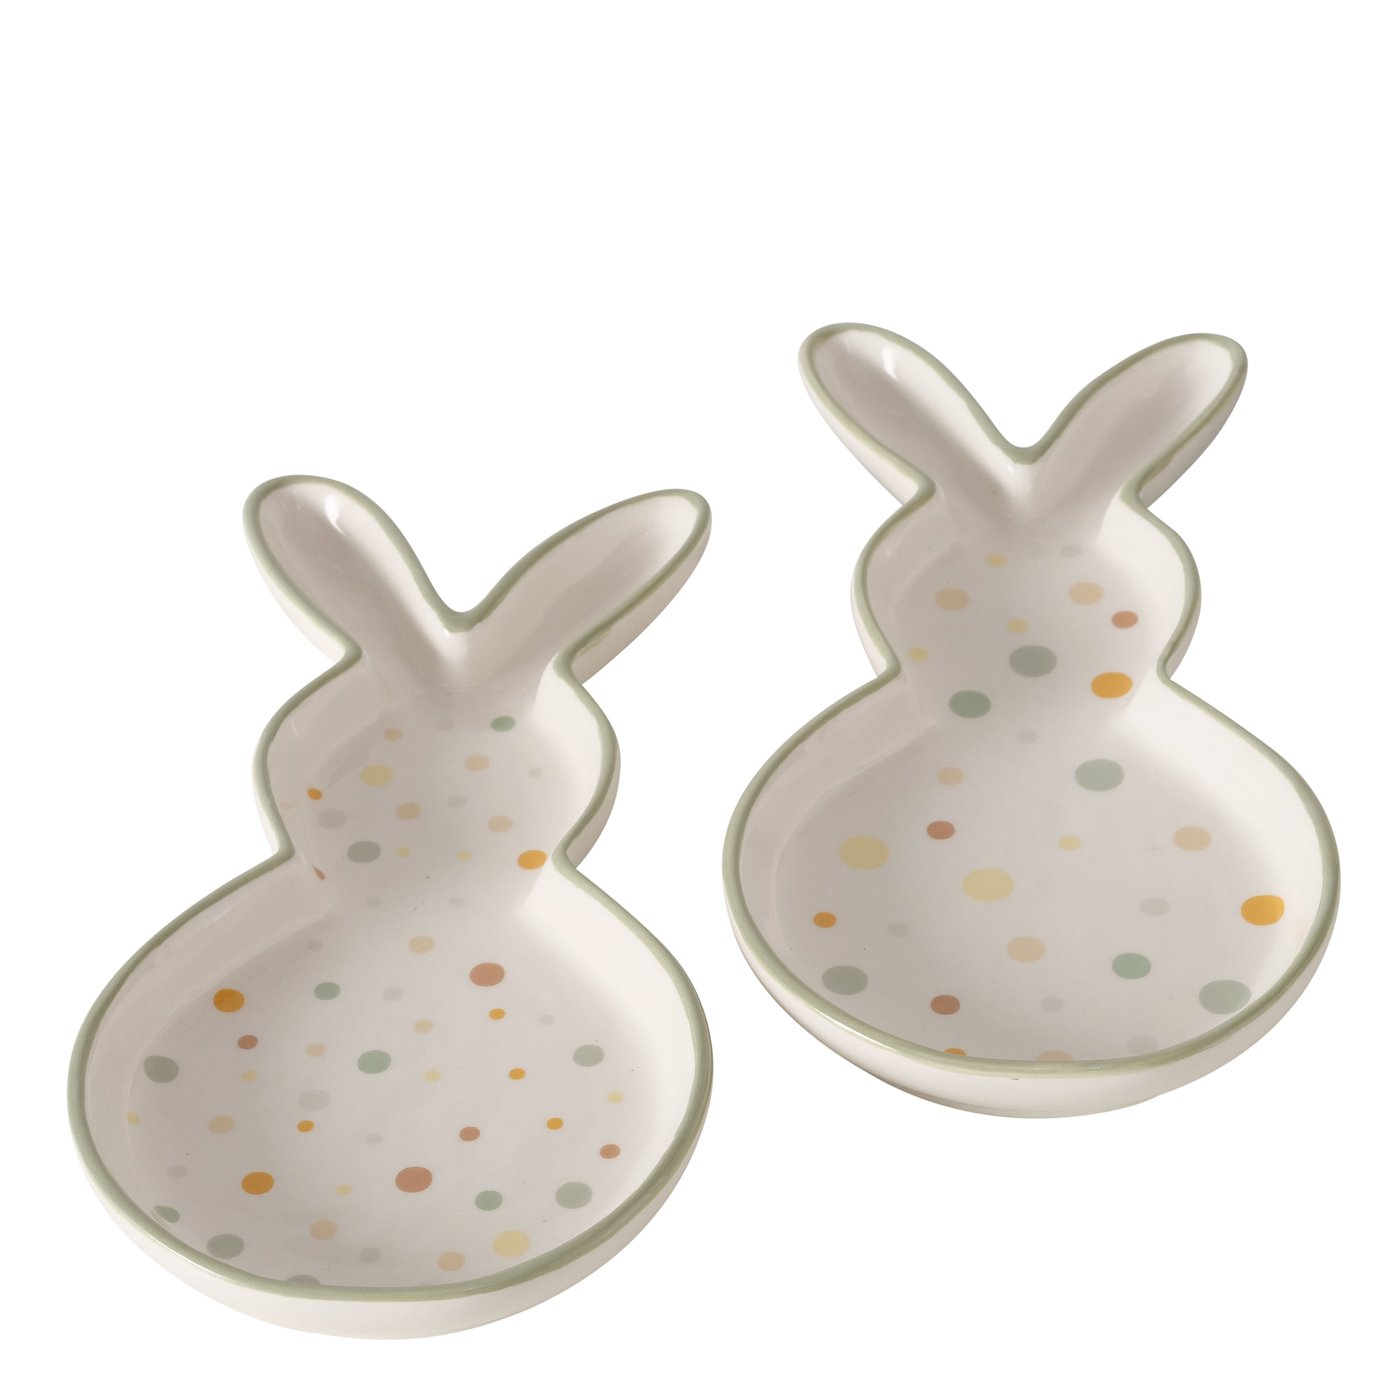 &Quirky Dotty Ceramic Easter Bunny Dish: Mini Dots or Dots